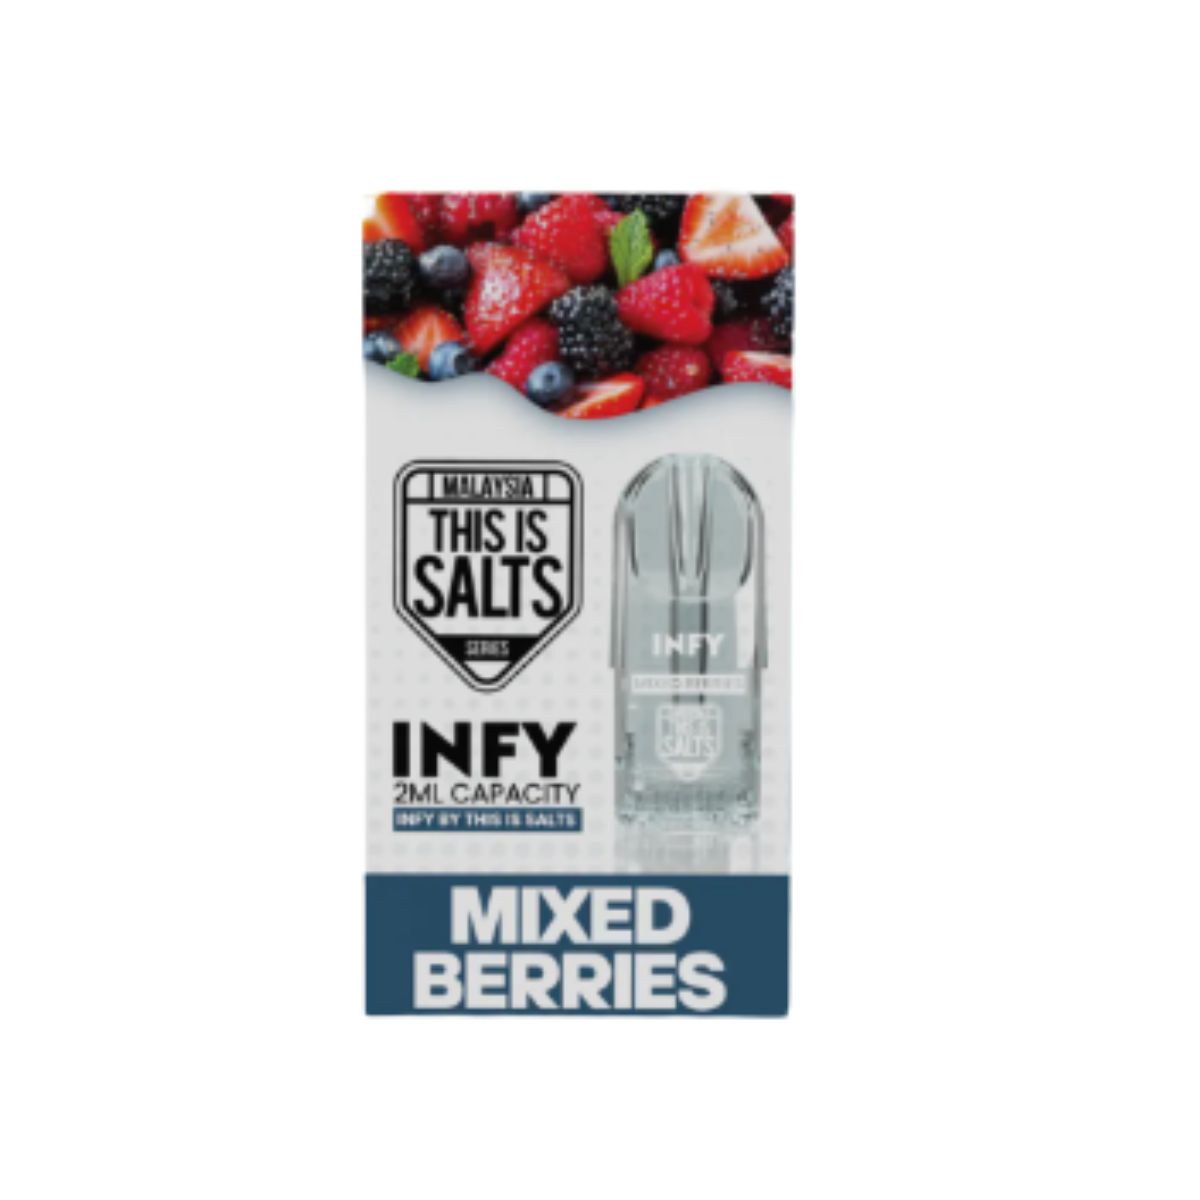 This Is Salts Infy Nicotine Vape Pod - Mixed Berries - 2ml